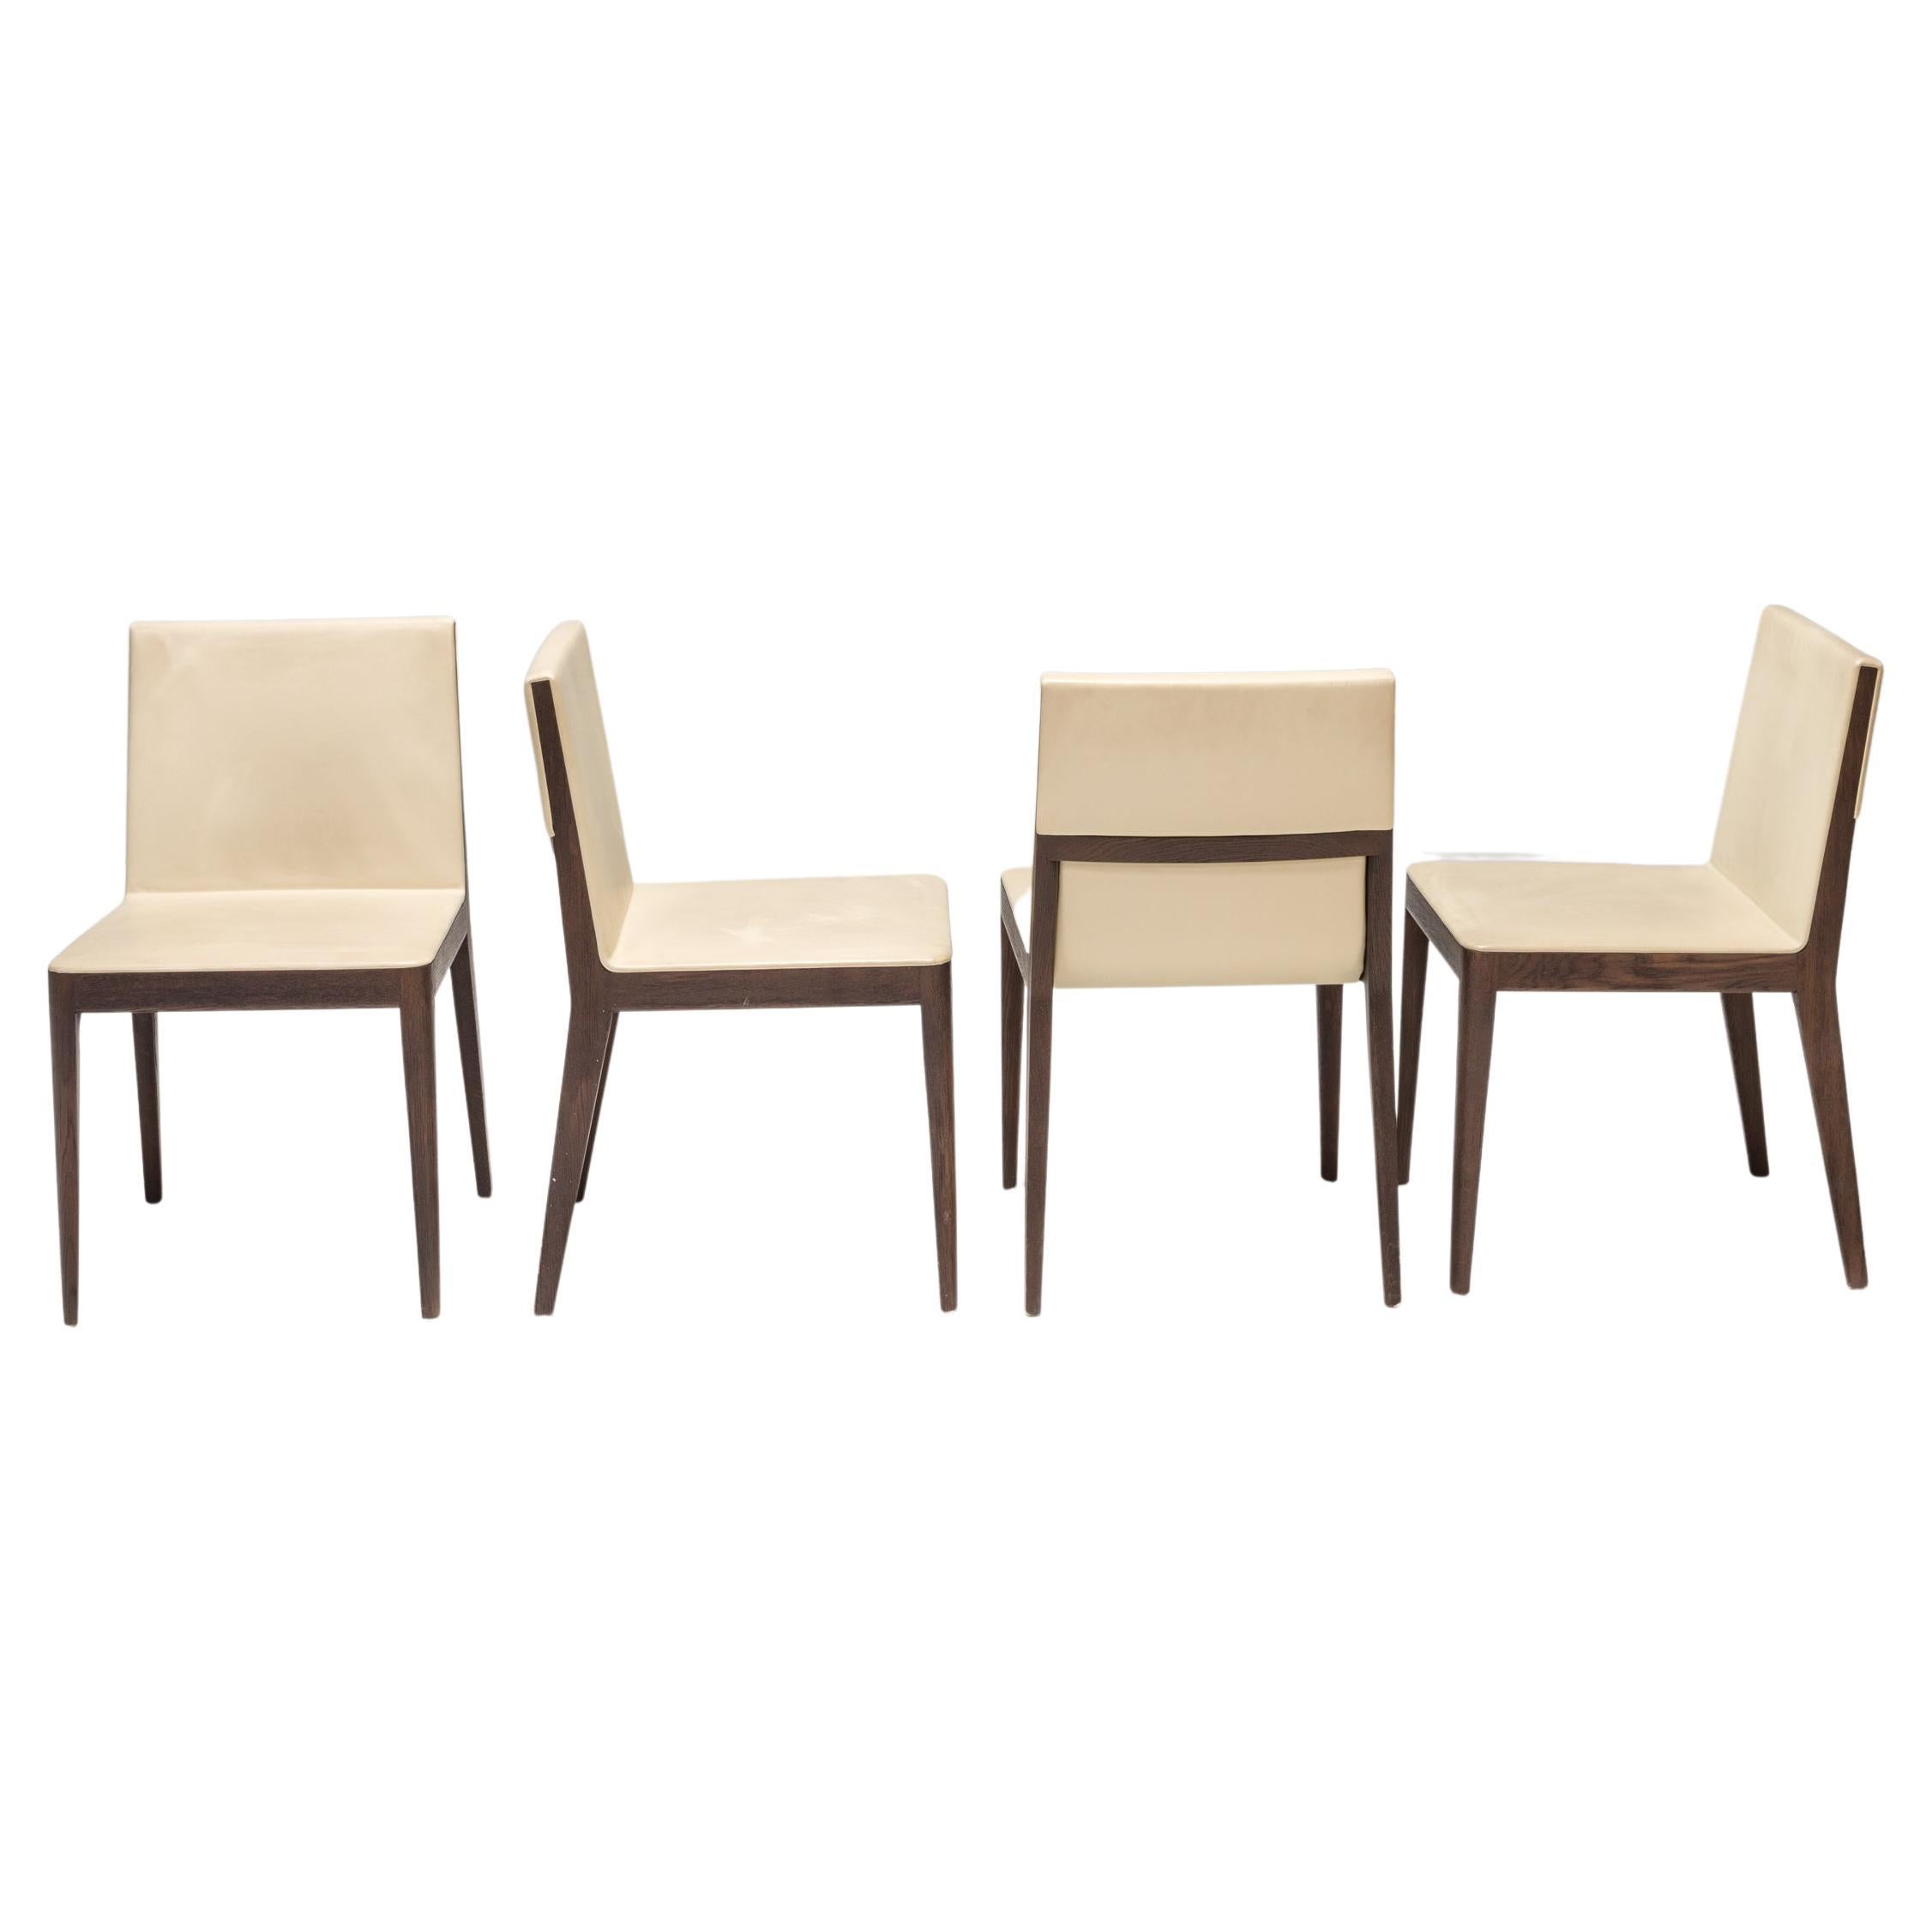 B&B Italia by Antonio Citterio Beige Leather & Walnut EL Dining Chairs, Set of 4 For Sale